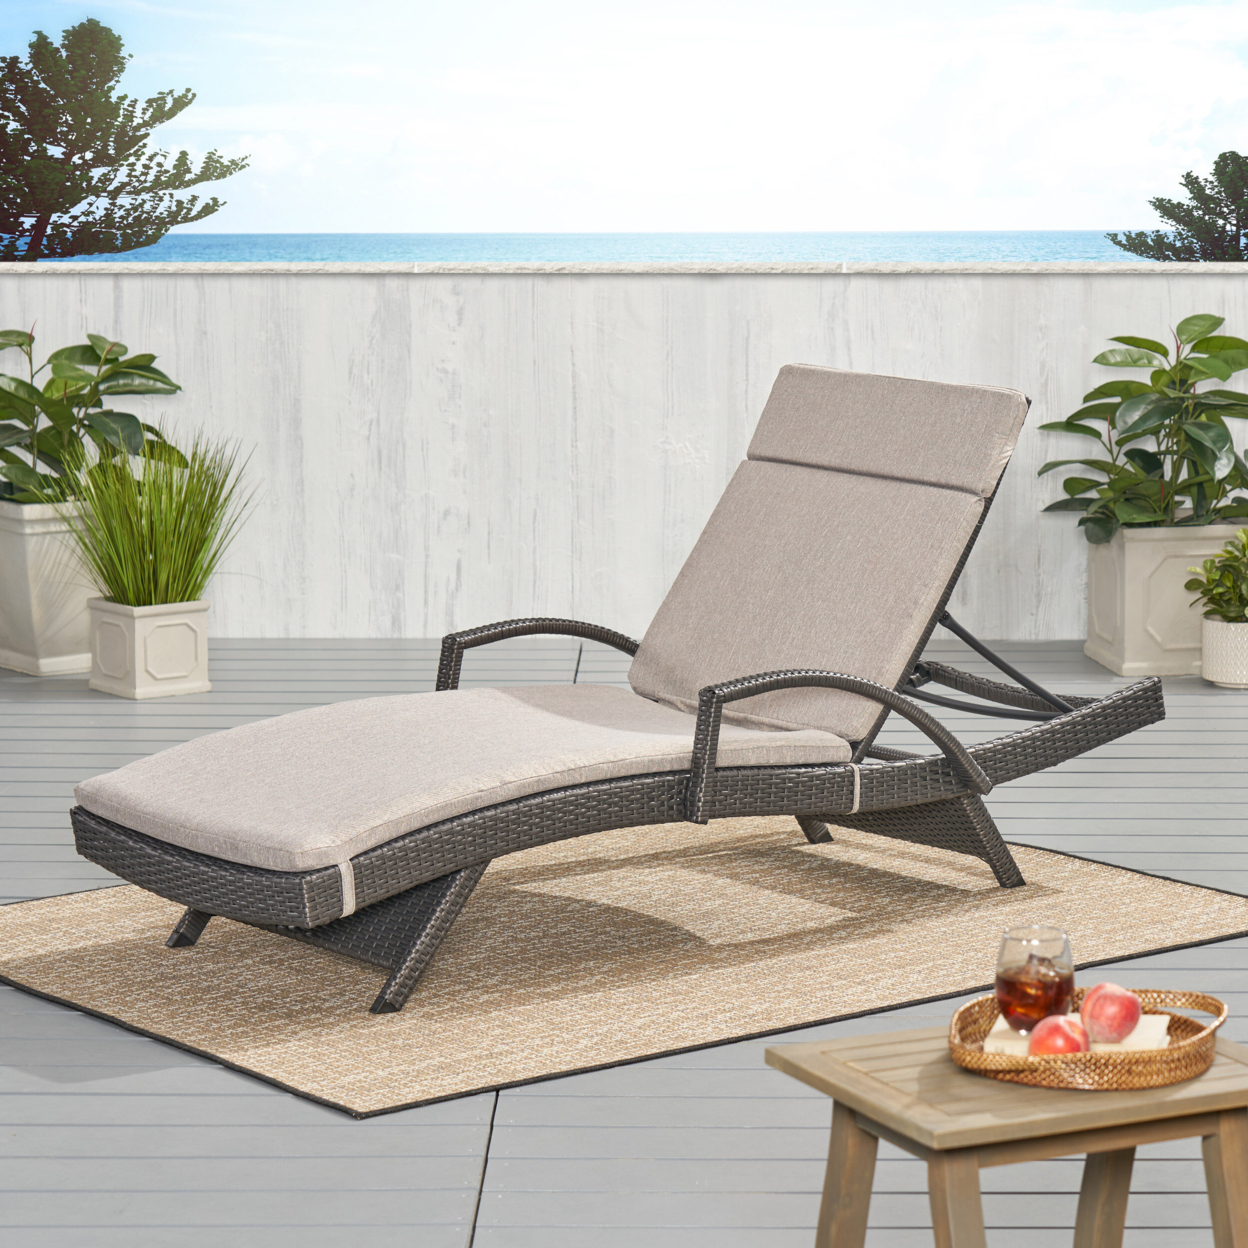 Soleil Outdoor Water Resistant Chaise Lounge Cushion - Charcoal